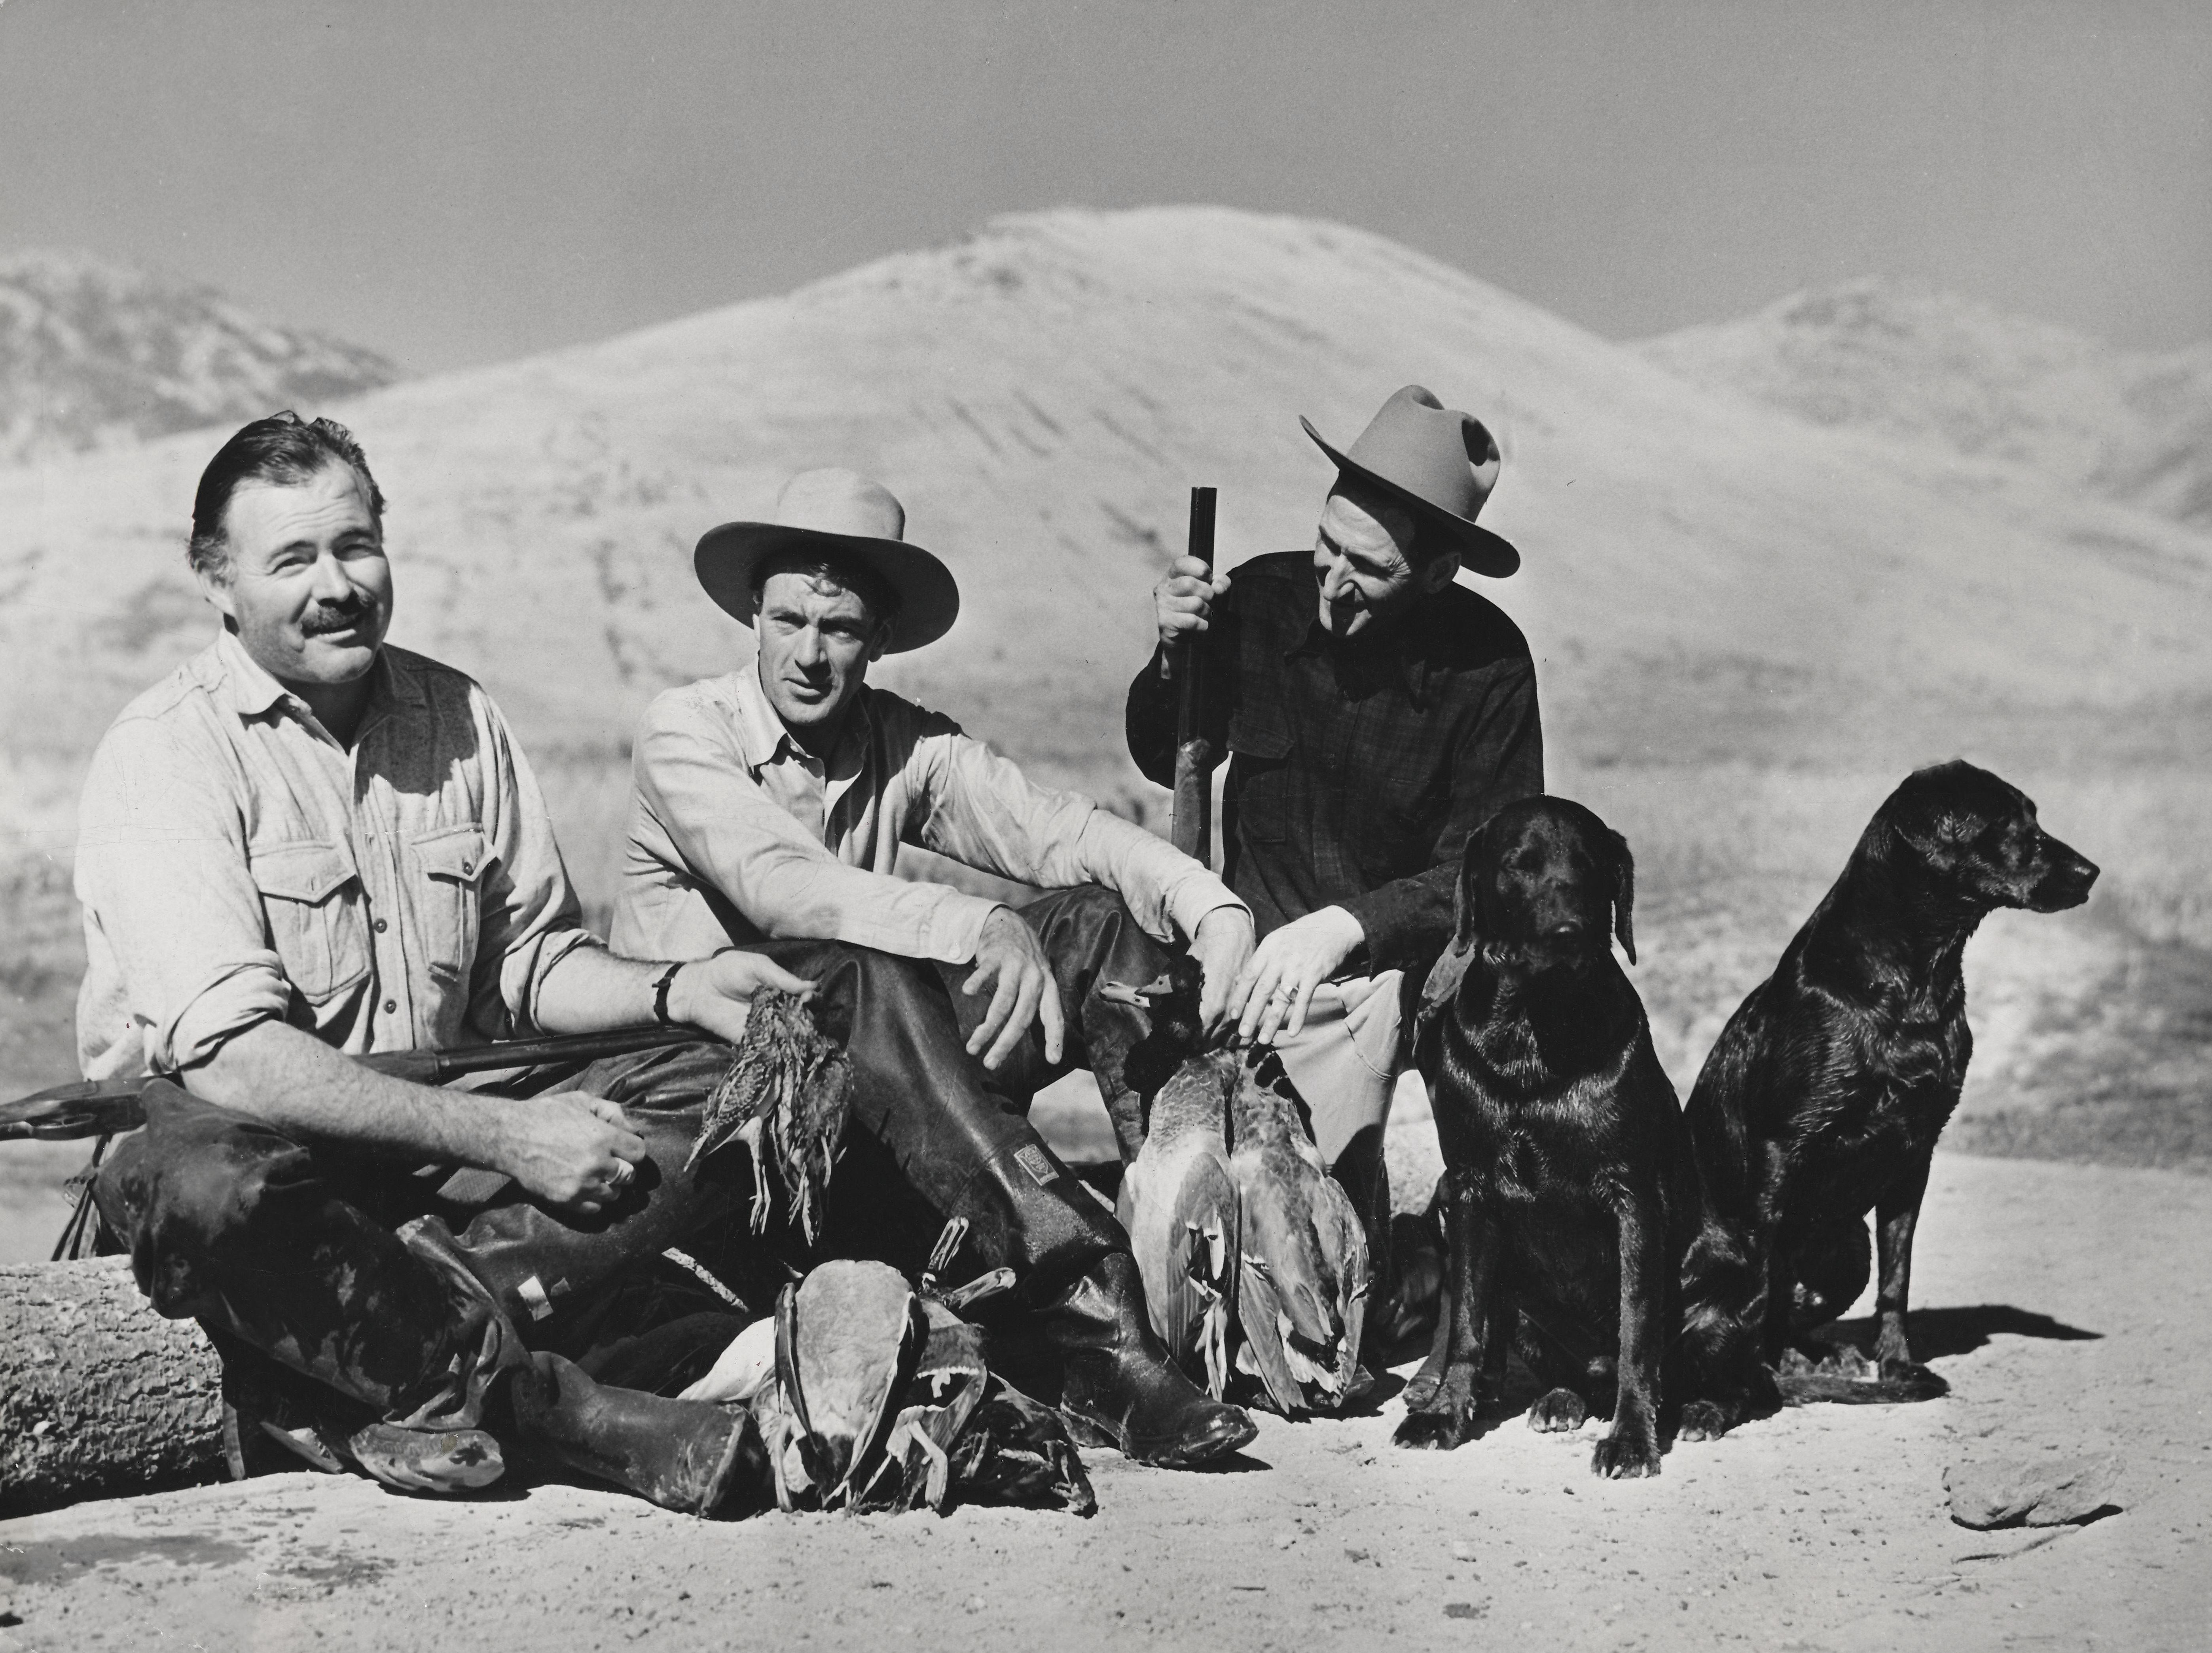 Unknown Portrait Photograph - Rare Capture of Ernest Hemingway and Gary Cooper on Hunting Trip Fine Art Print